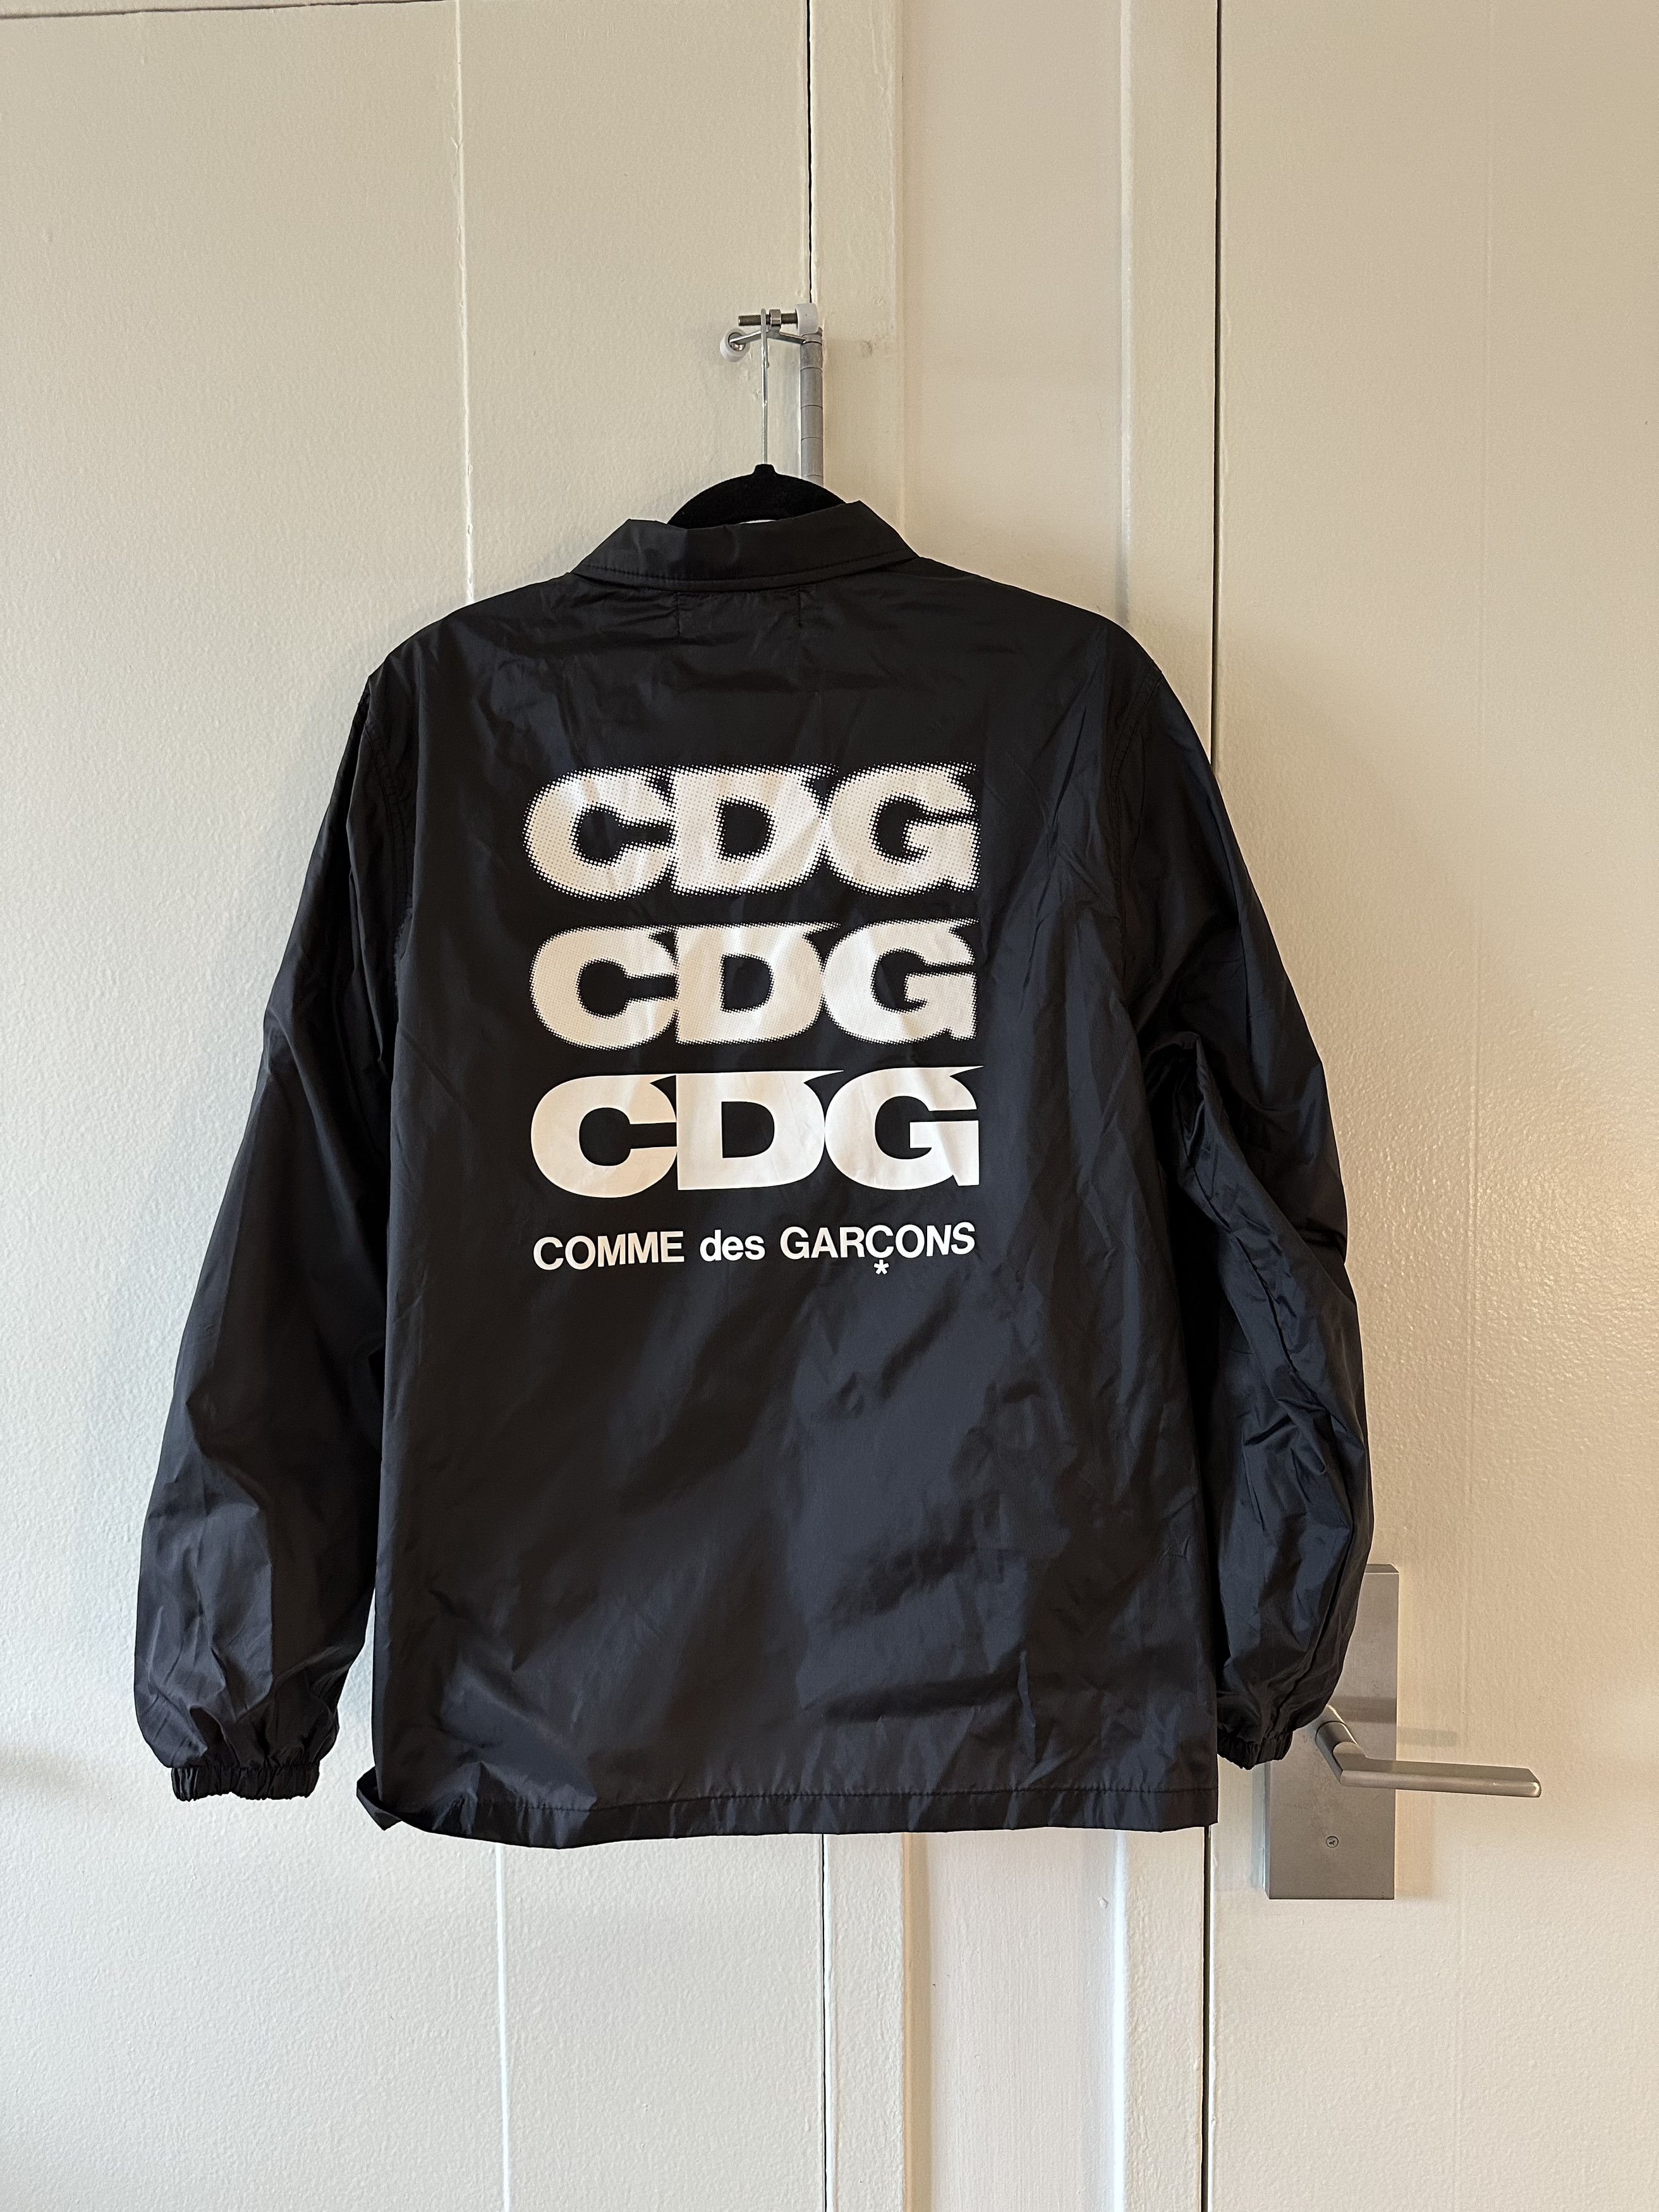 Comme Des Garcons My Energy Comes From Freedom | Grailed